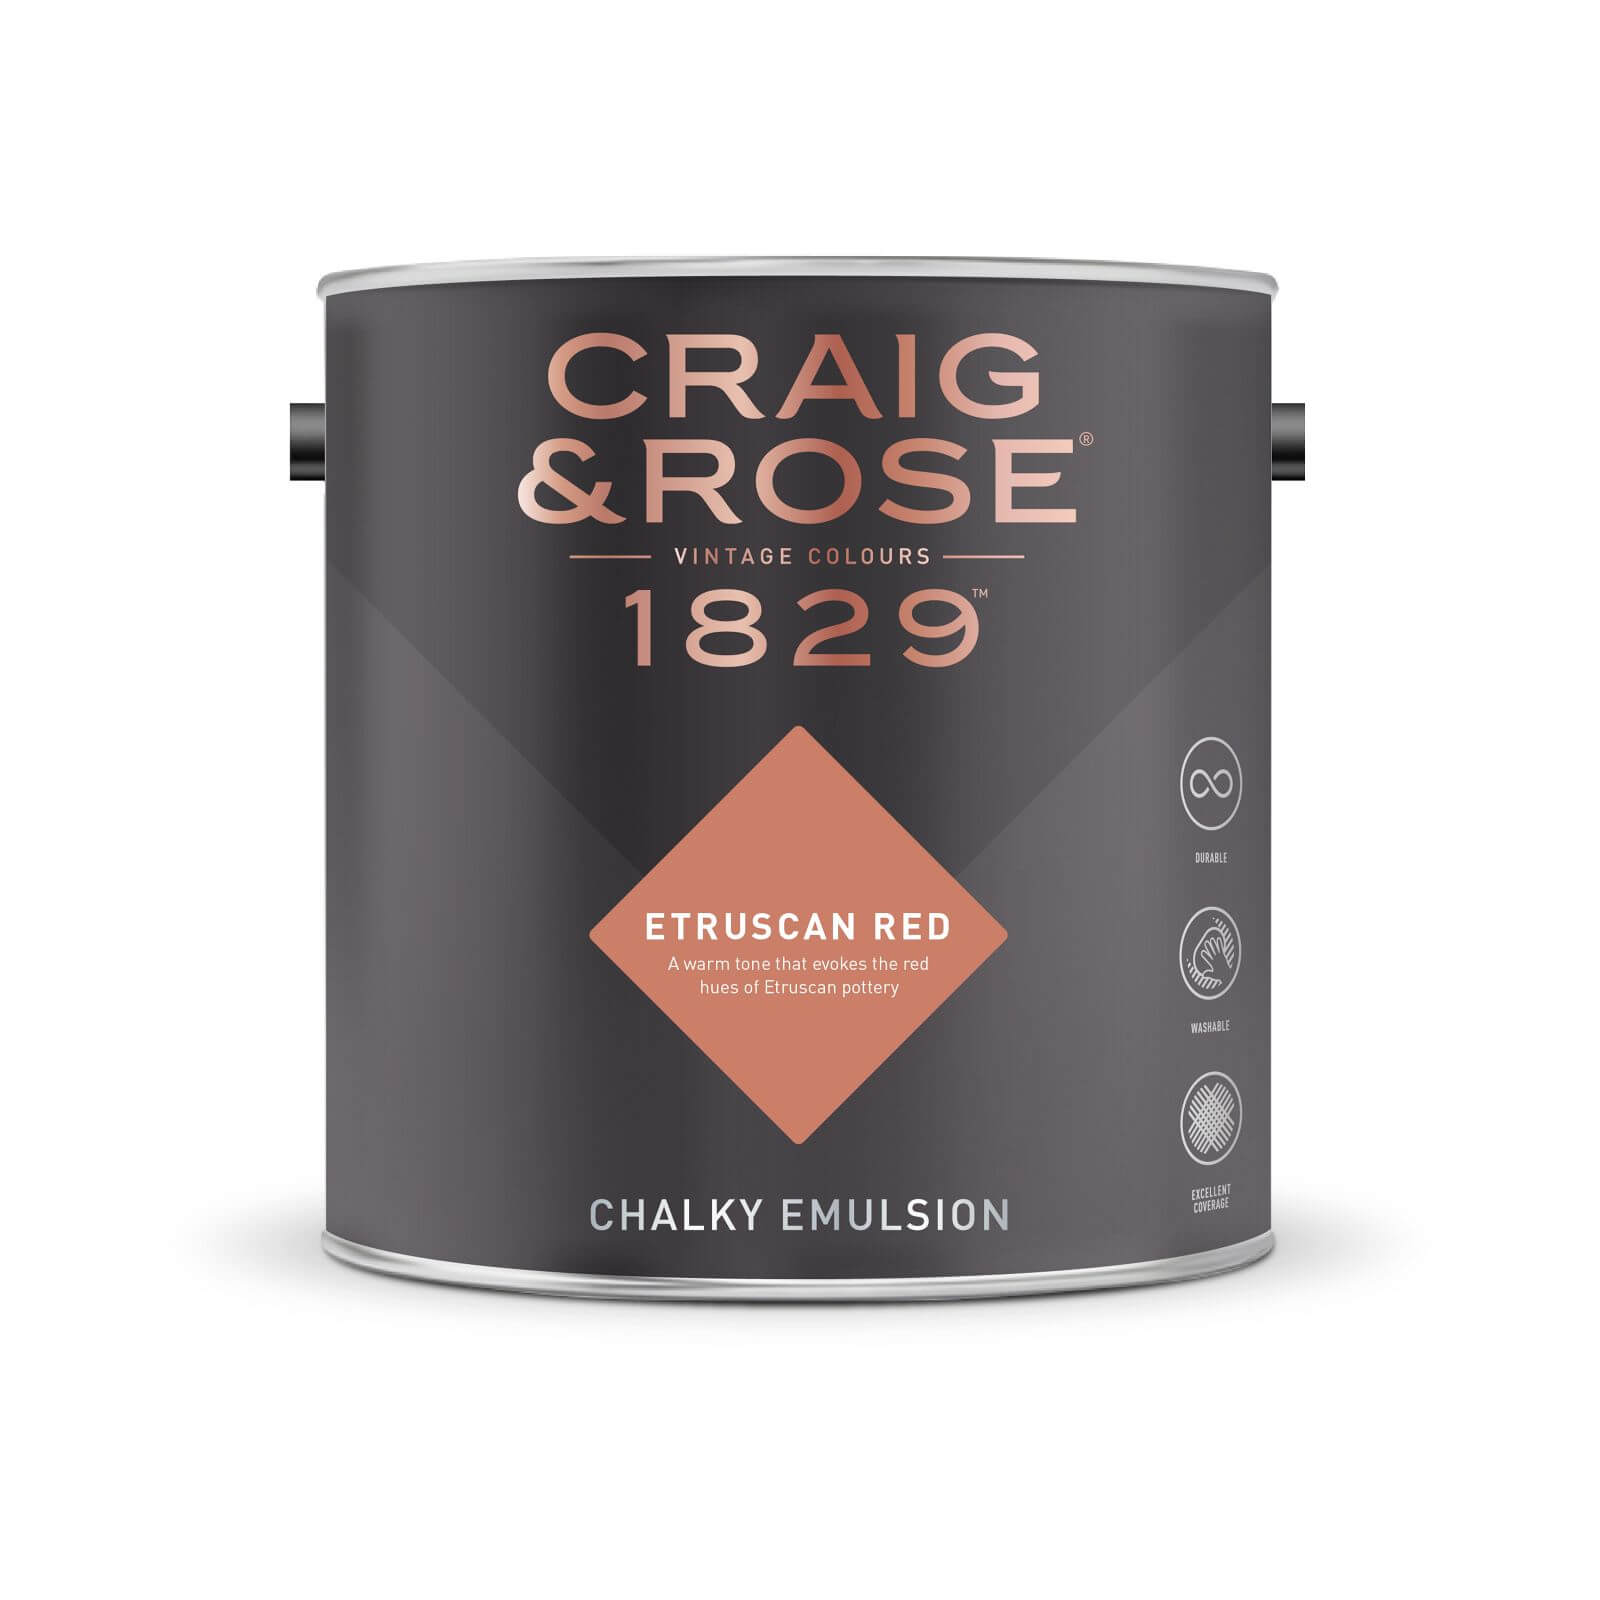 Craig & Rose 1829 Chalky Emulsion Paint Etruscan Red - 5L